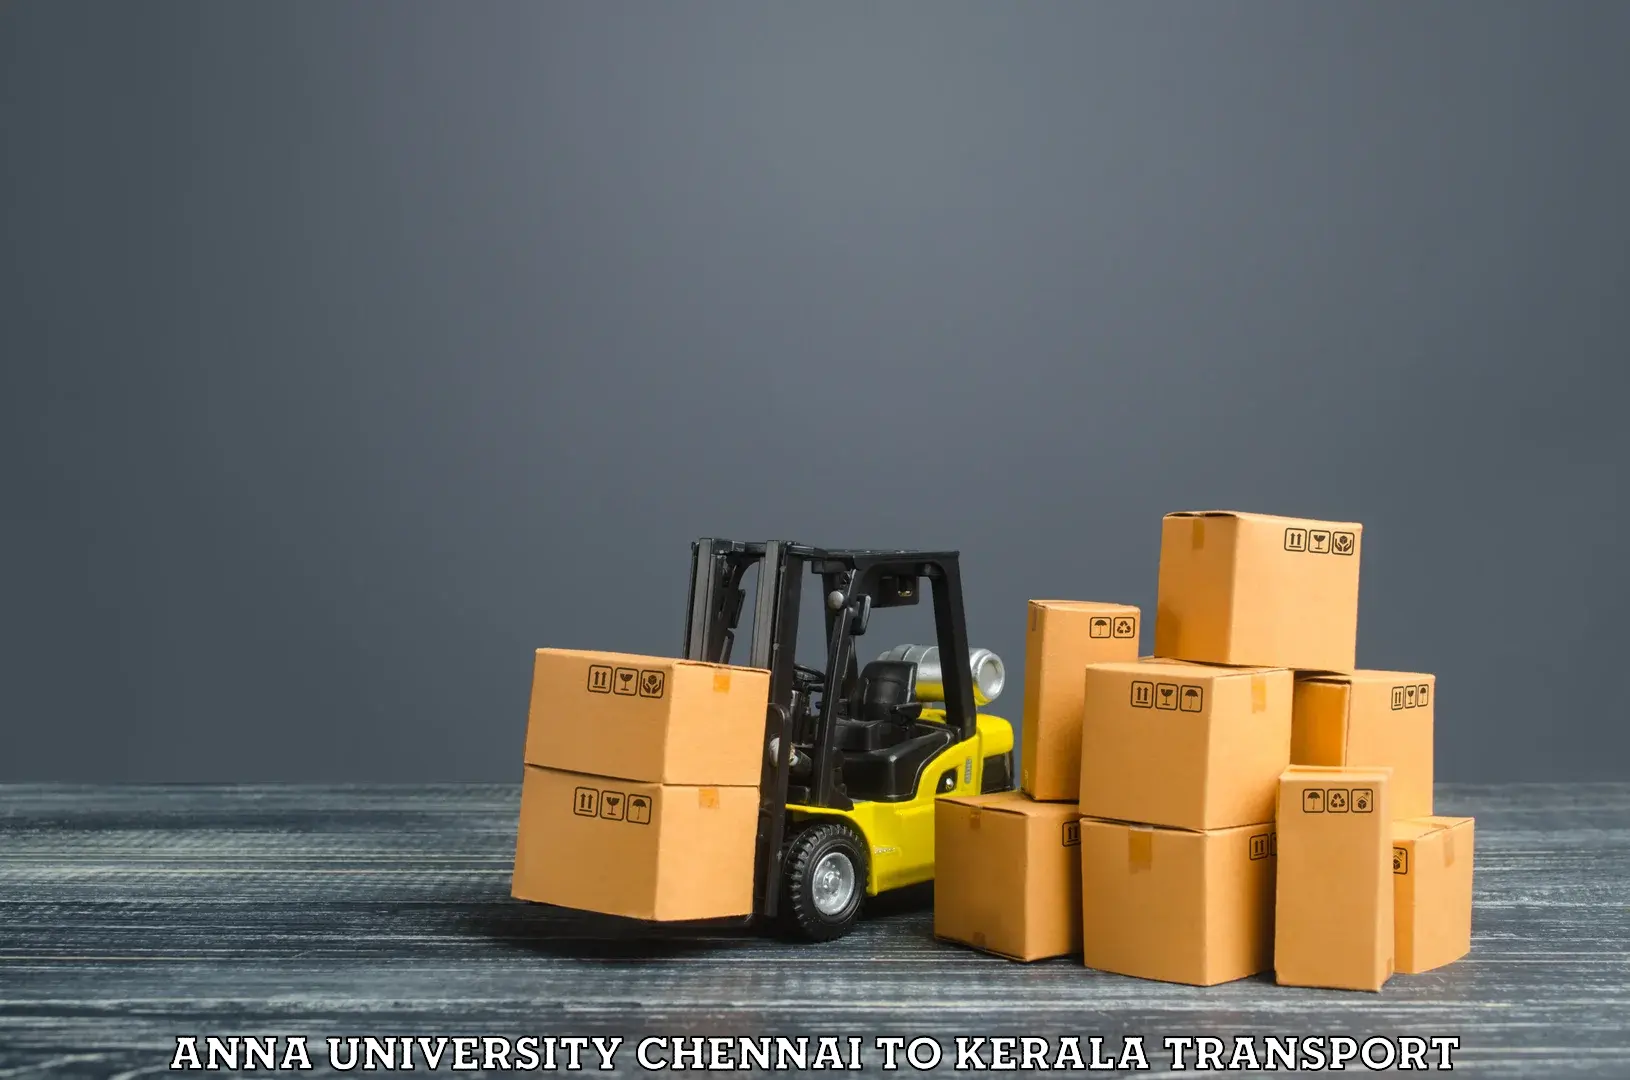 Delivery service Anna University Chennai to Cochin University of Science and Technology